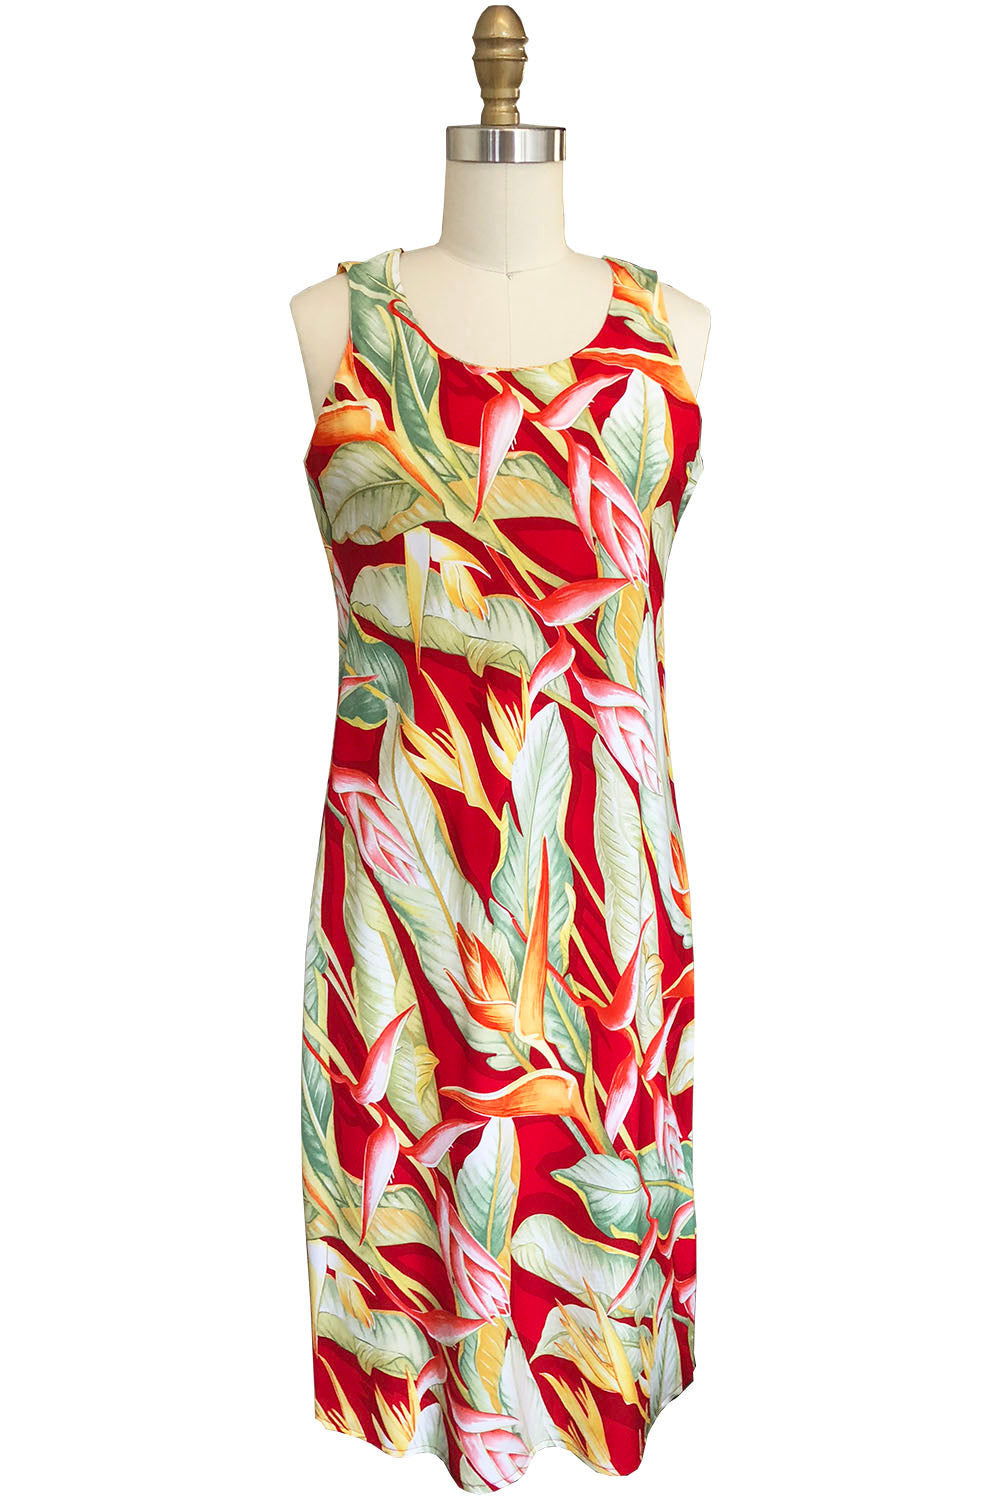 Heliconia Heaven Red Tank Dress